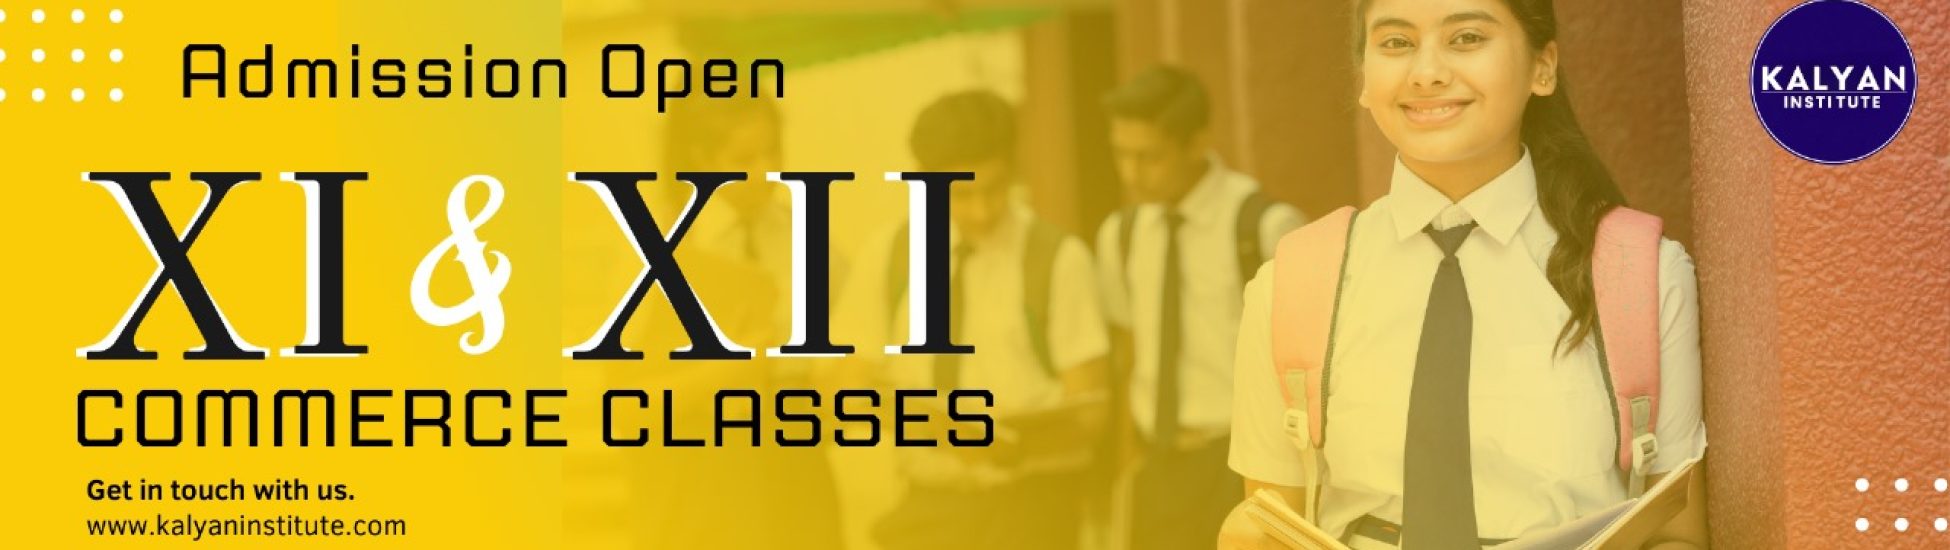 Kalyan Institute Studying Commerce Subjects in 11th and 12th Classes